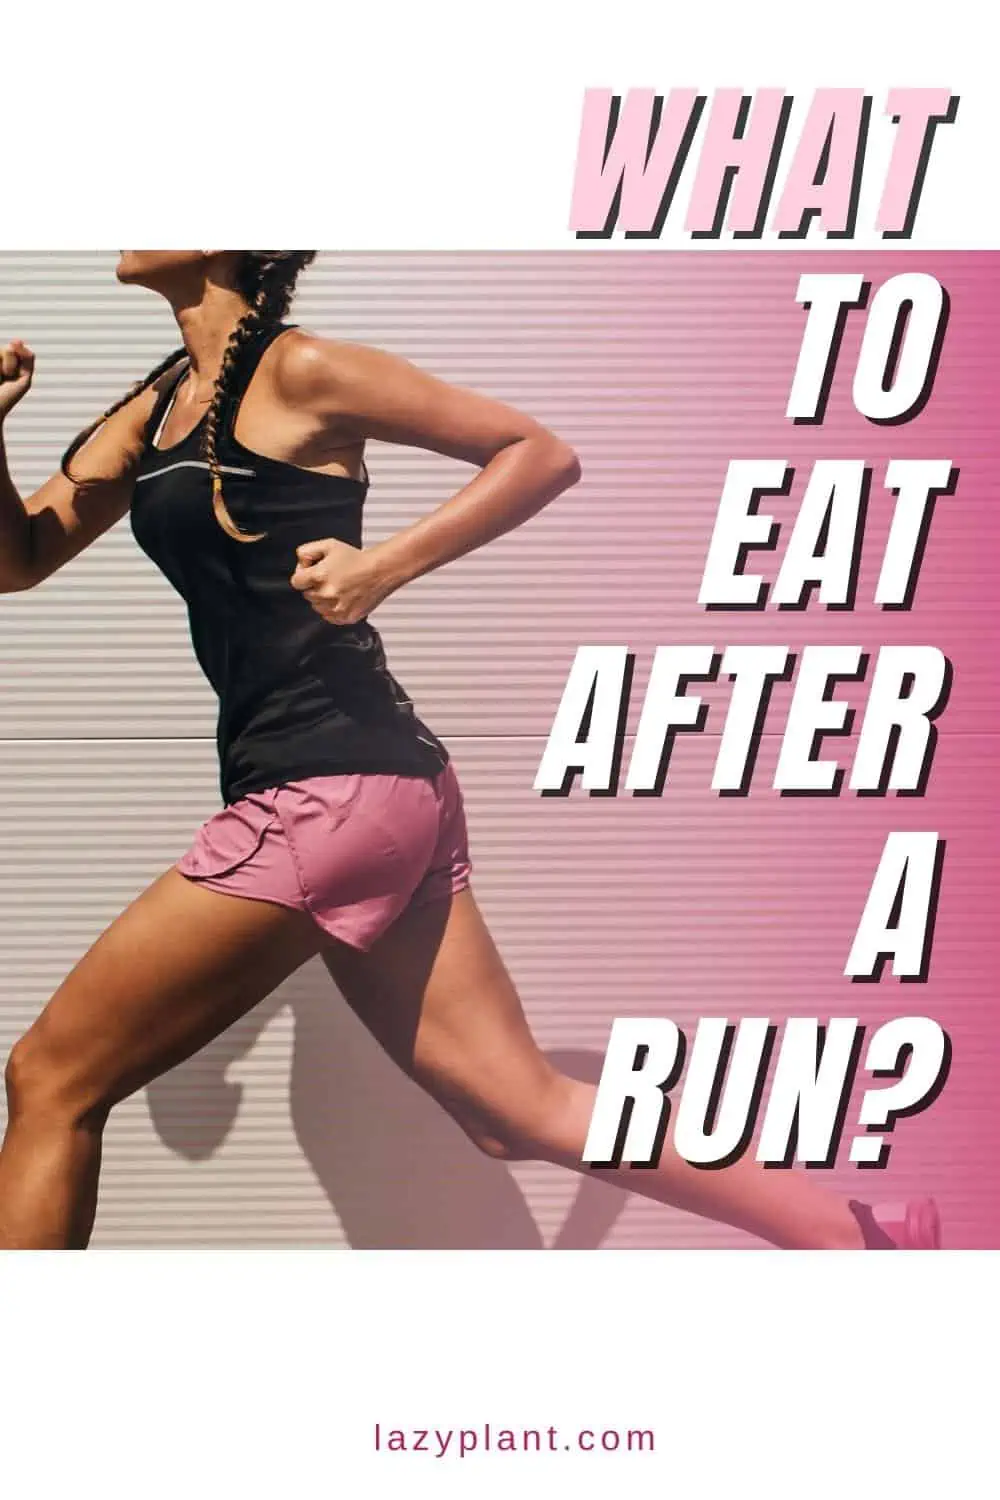 What to eat after a long run for fast recovery?